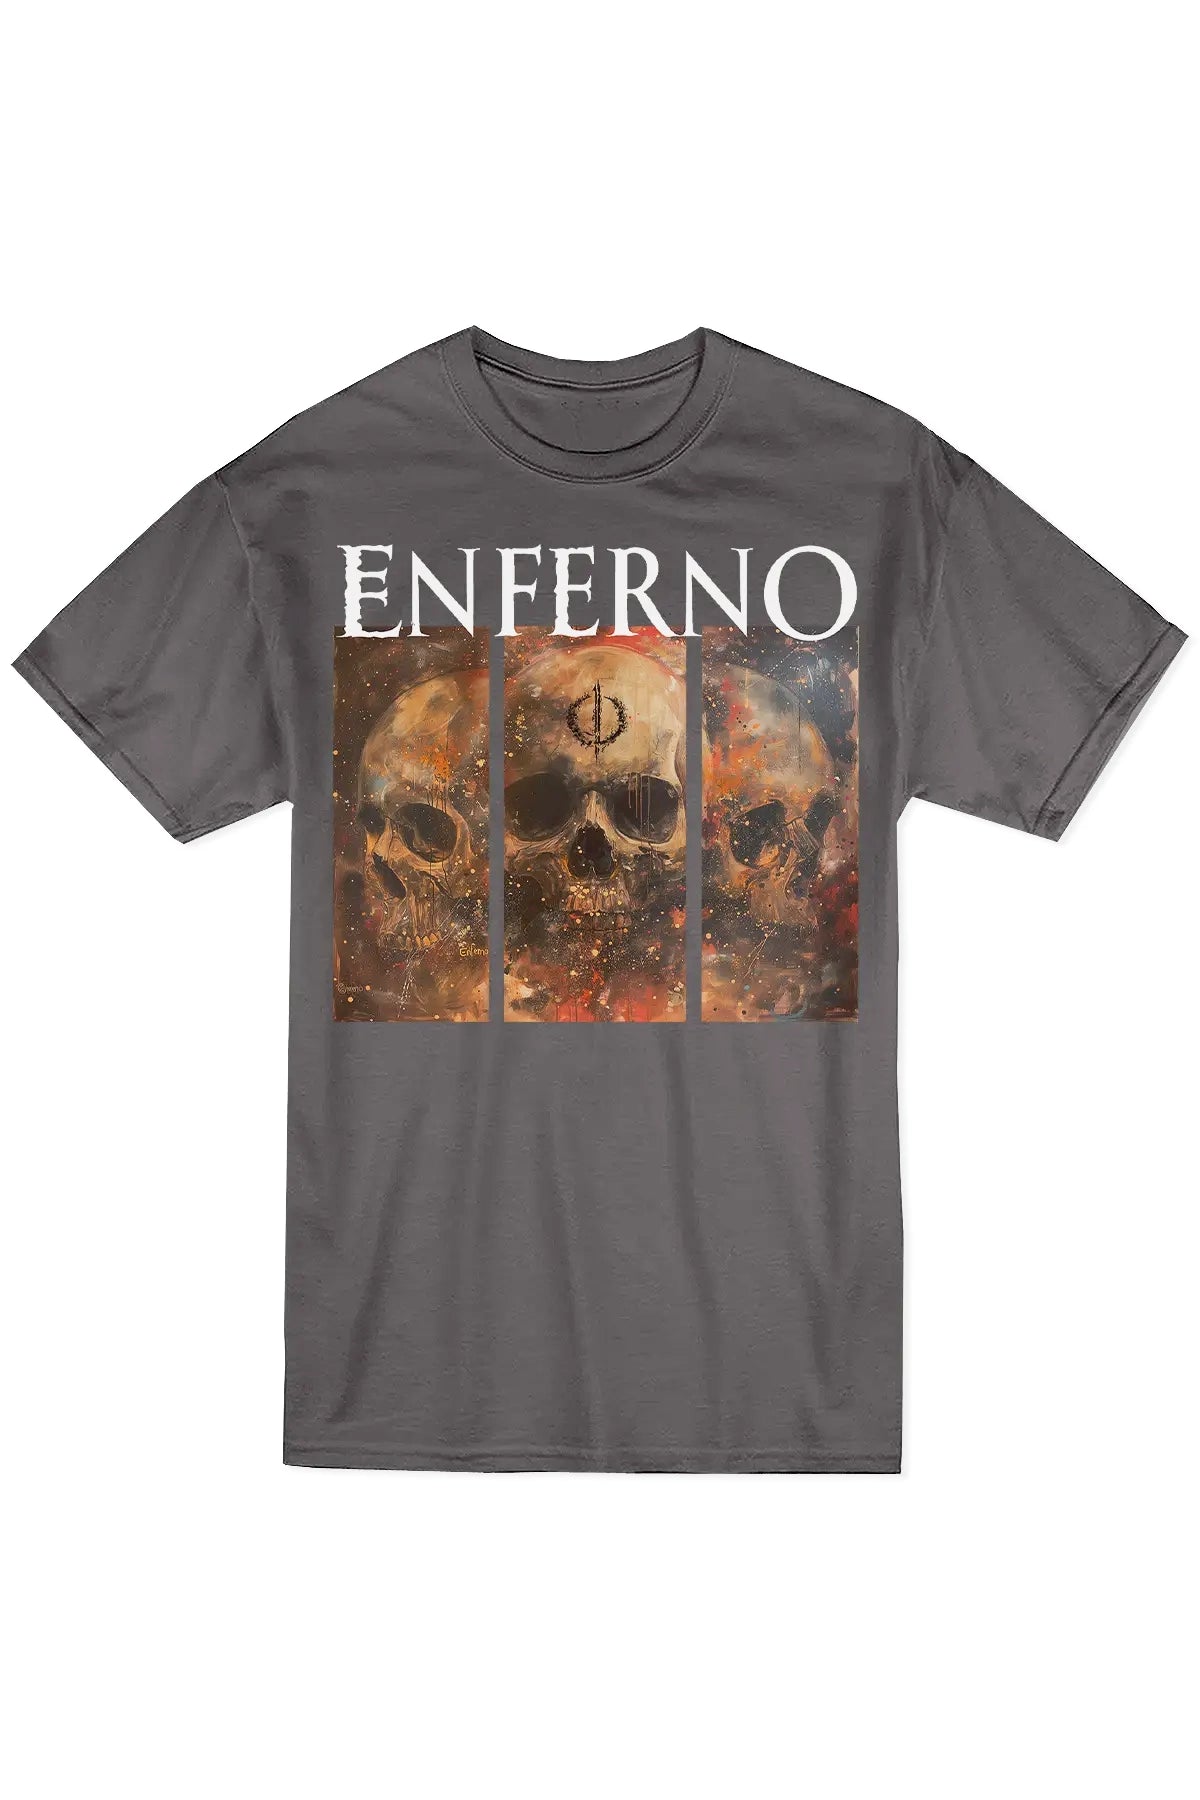 The Enferno's Core Tee in Pepper.